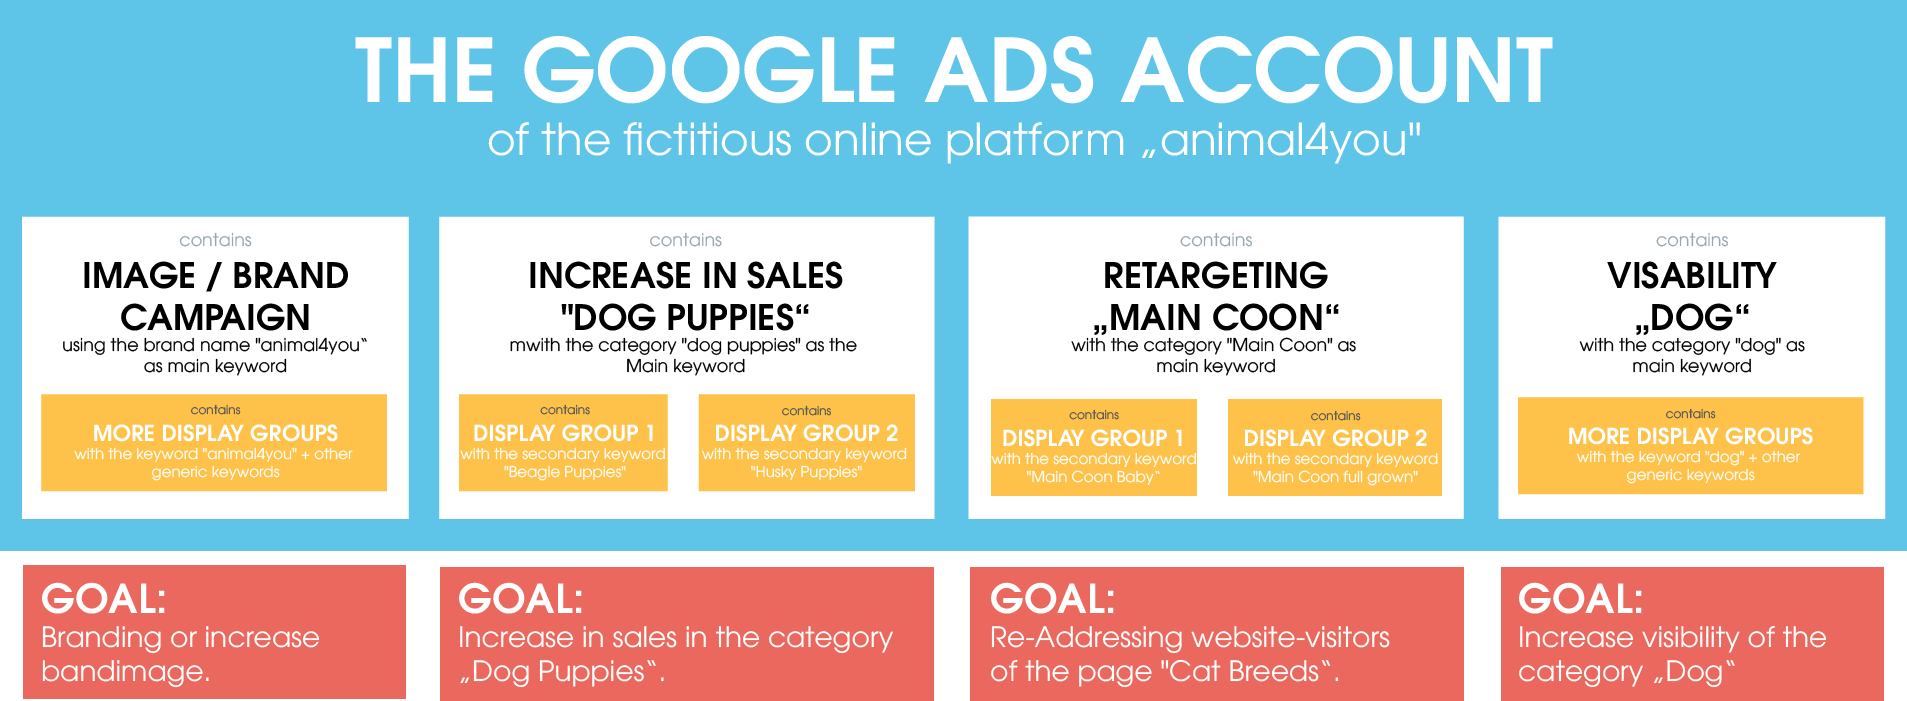 The graphic illustrates the clustering of a Google Ads account according to goals. The campaigns are deliberately named after the corresponding goals in order to focus on them. In addition to a brand campaign to increase the image, there are therefore also revenue-increasing and retargeting campaigns.